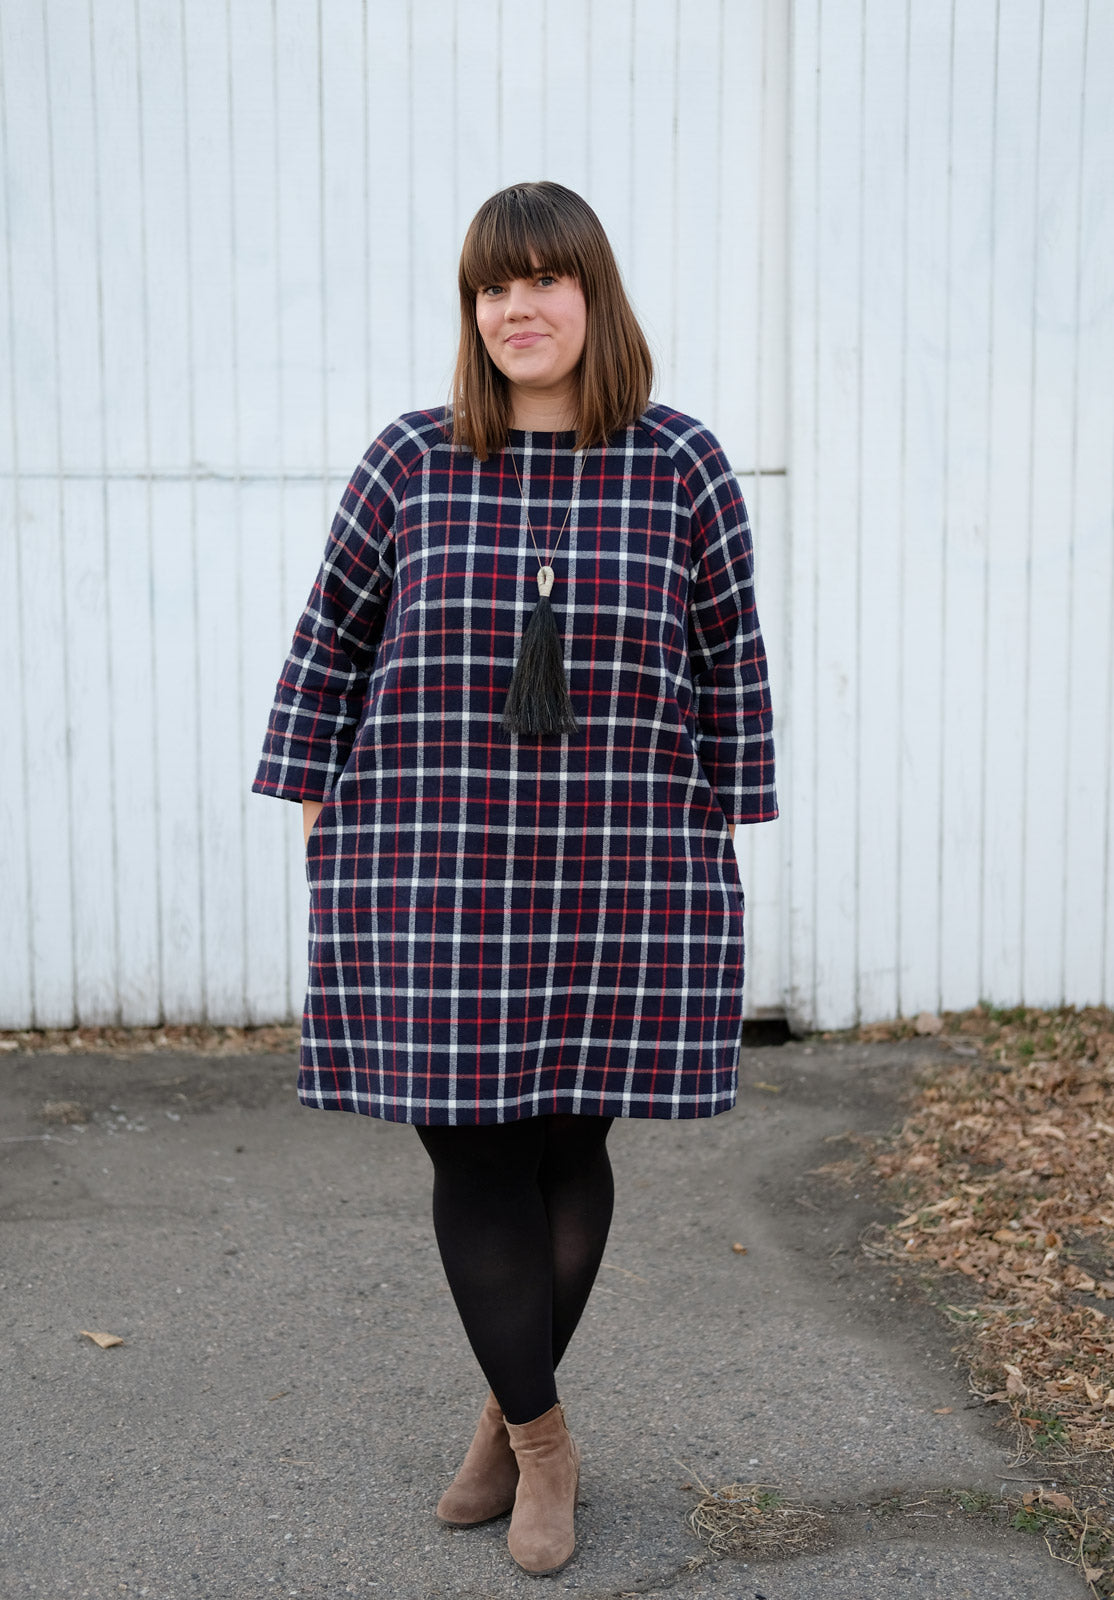 Kaylee standing with her legs crossed and hands in the pockets of the Avid Seamstress Raglan Dress